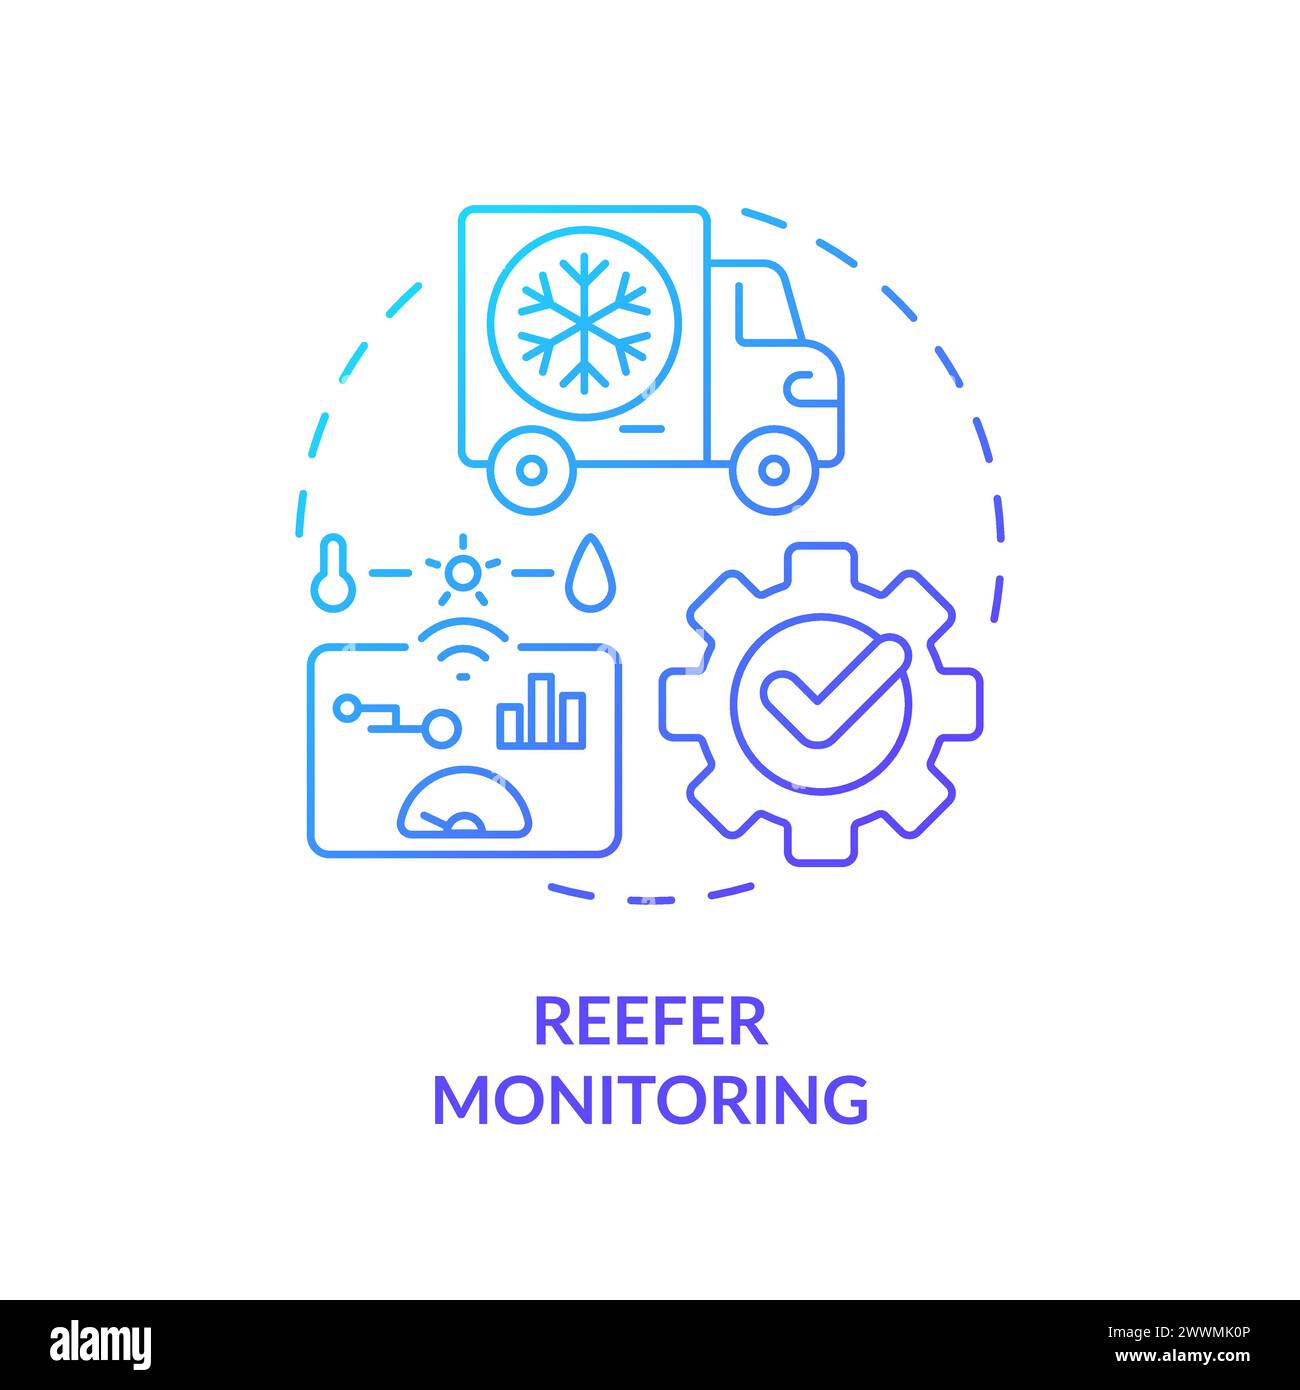 Reefer monitoring blue gradient concept icon Stock Vector